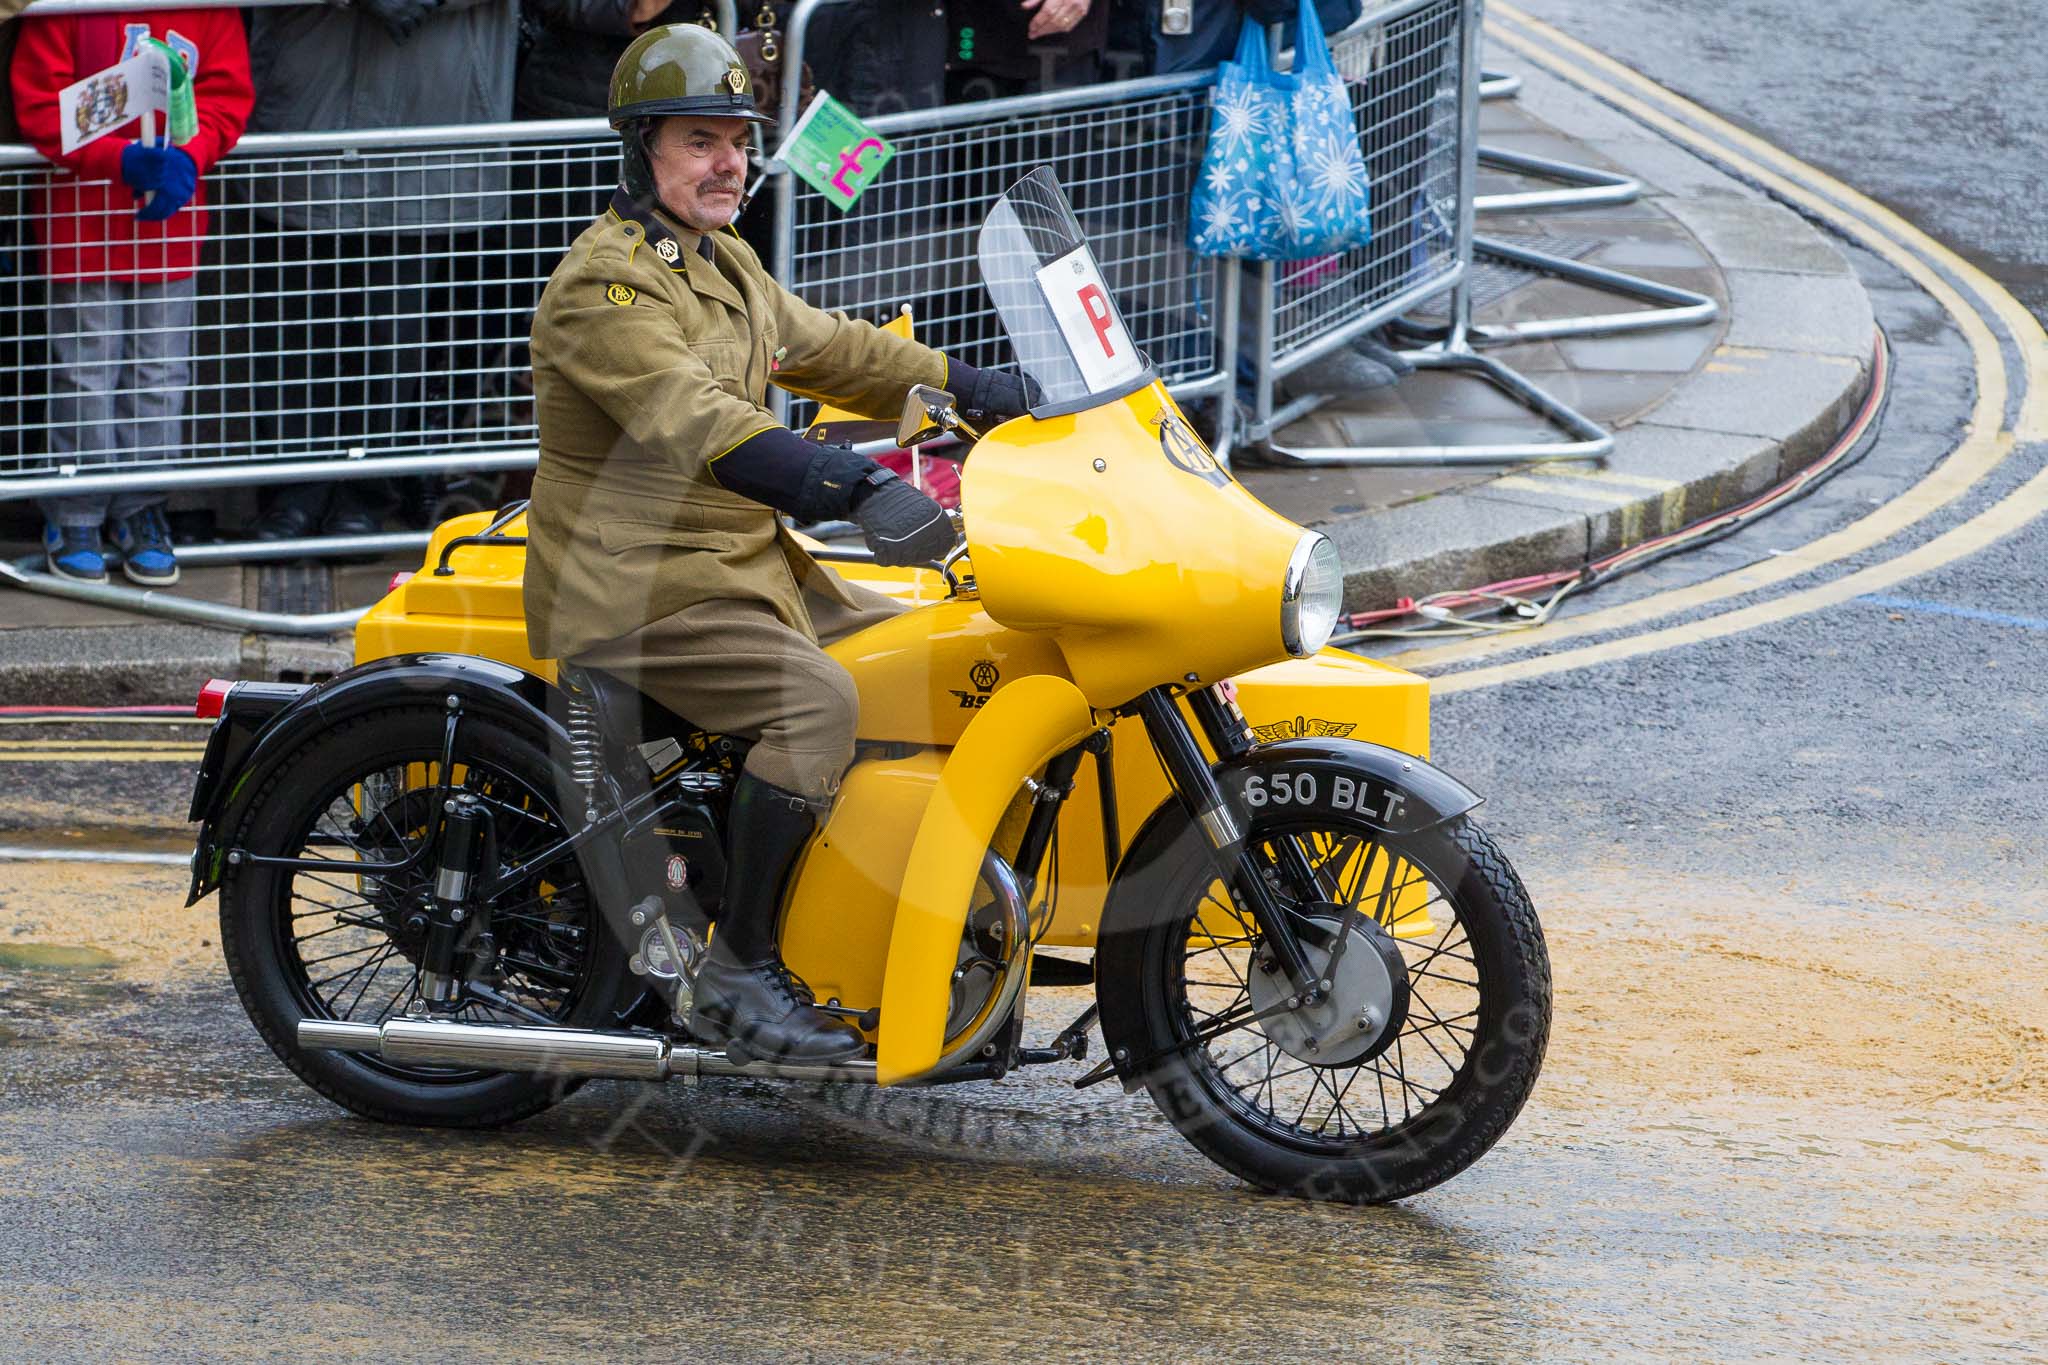 Lord Mayor's Show 2012: Entry 97 - AA, the Automobile Association, with a 1961 BSA M21 Combination motorcycle and sidecar..
Press stand opposite Mansion House, City of London,
London,
Greater London,
United Kingdom,
on 10 November 2012 at 11:43, image #1275